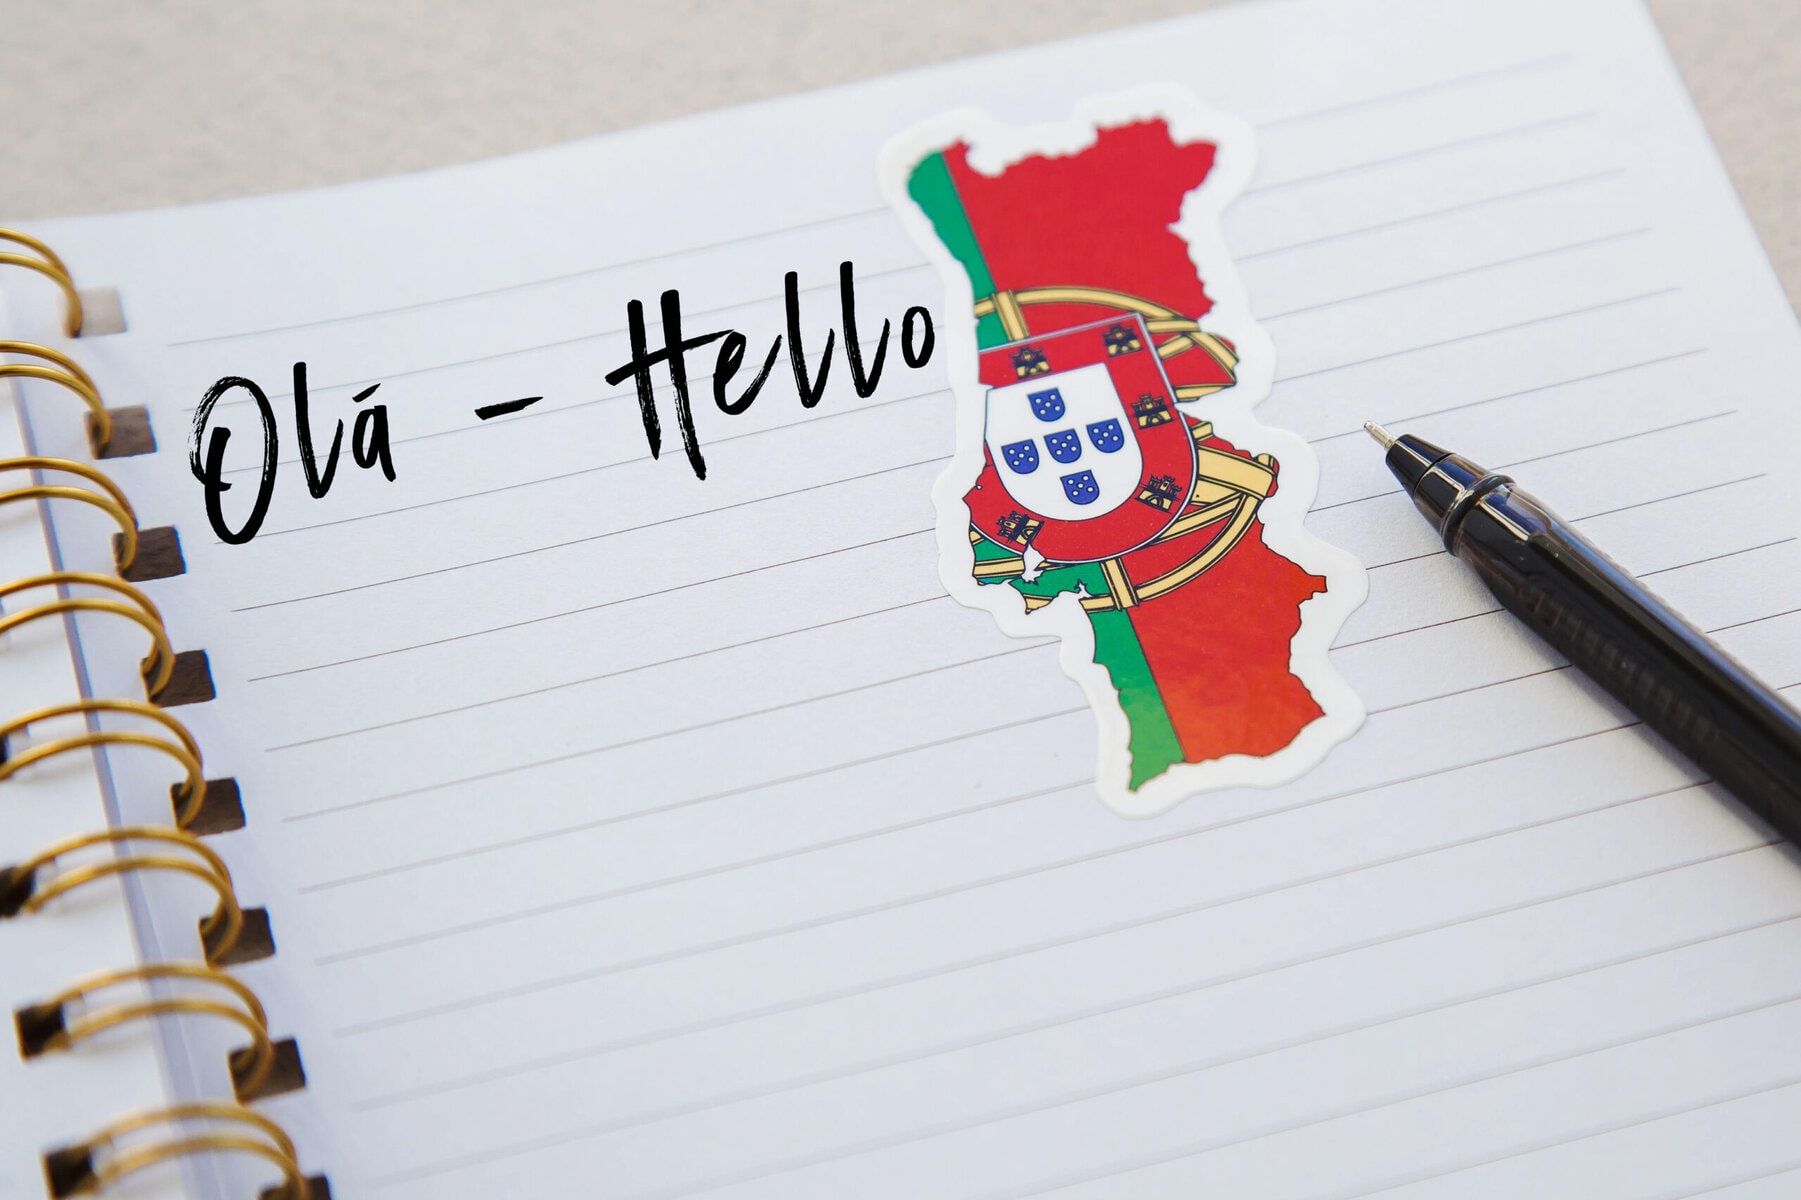 Portuguese Language Tips: Communicating on Your Trip